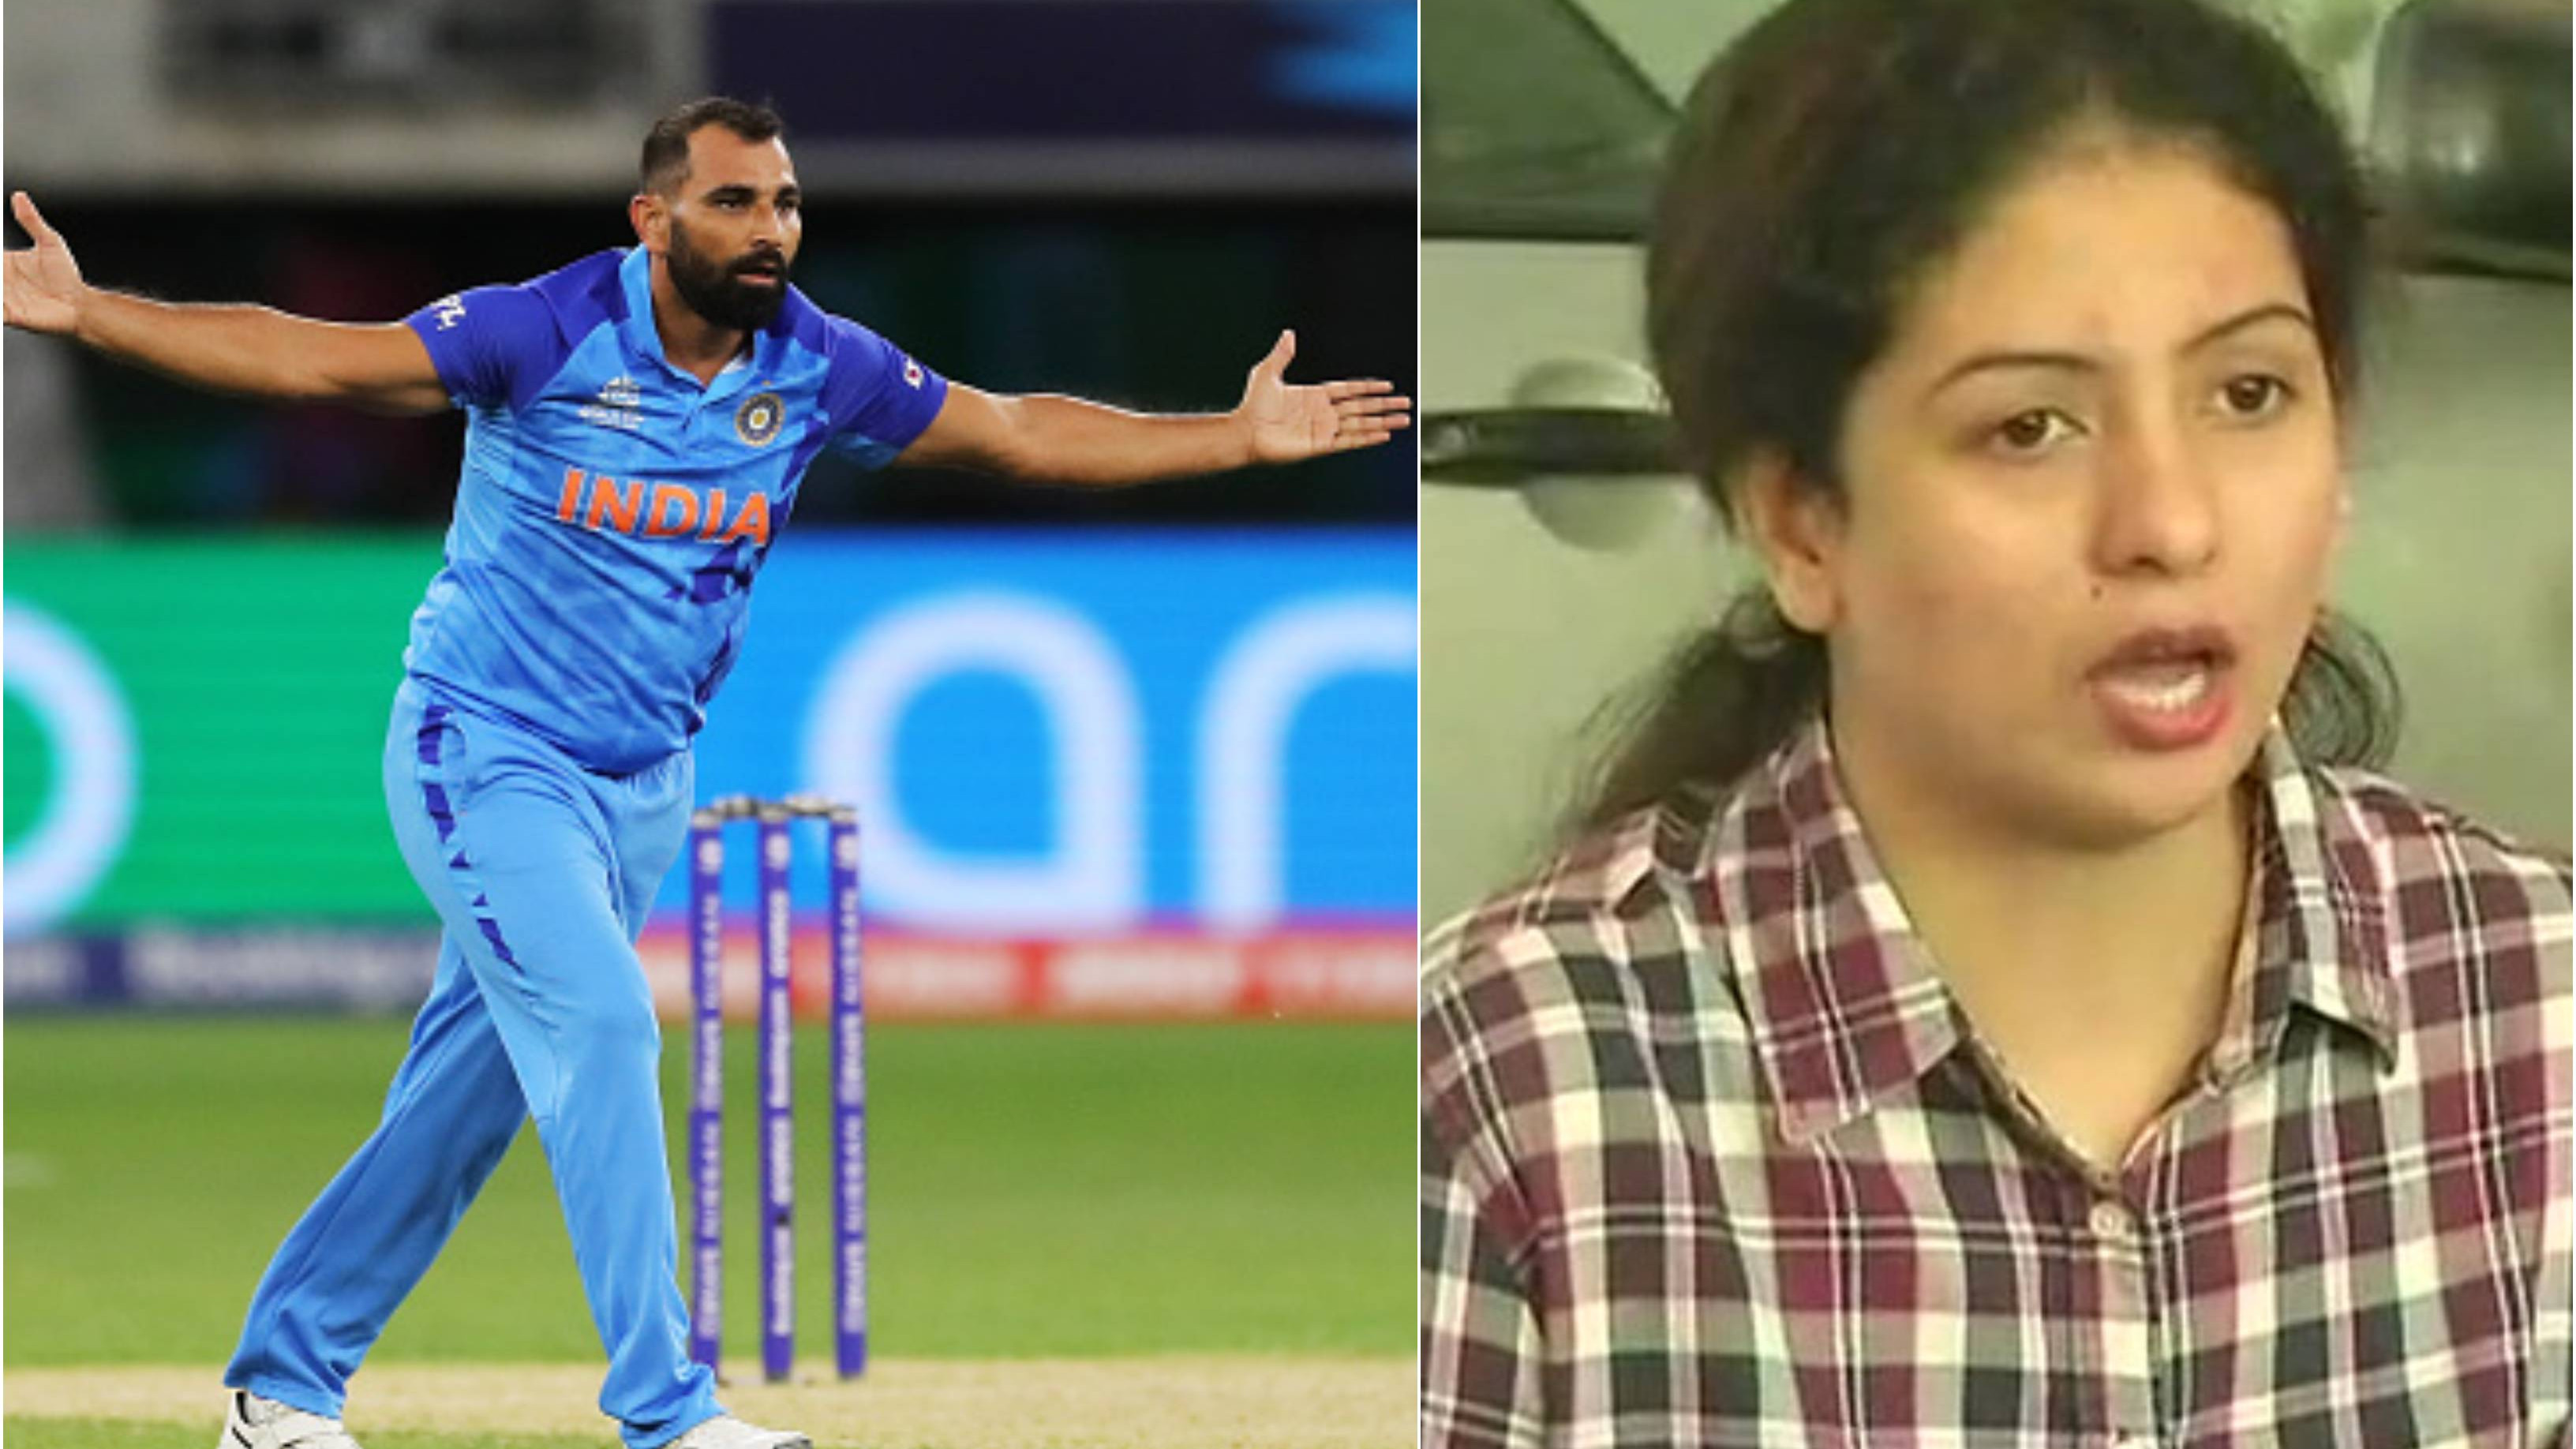 Kolkata court ordered Mohammad Shami to pay Rs 1.30 lakh monthly alimony to estranged wife